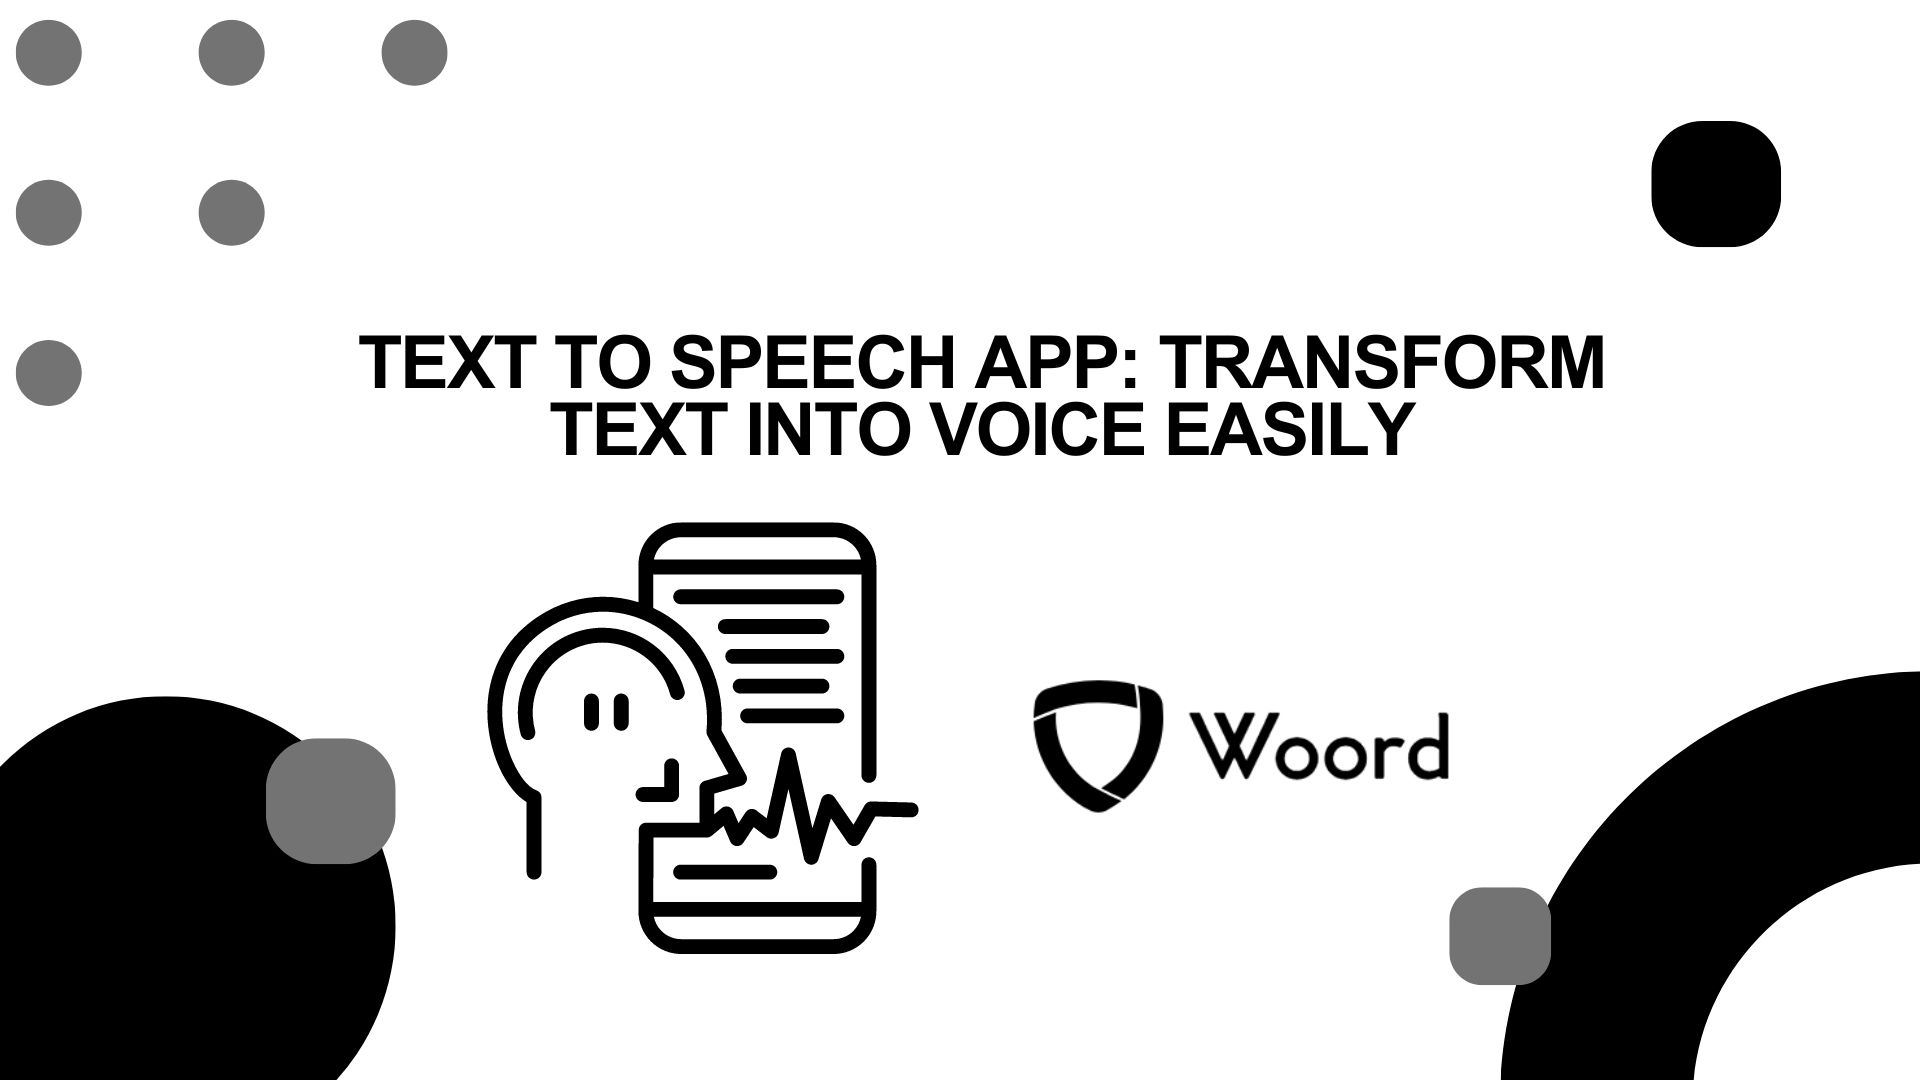 Text To Speech App: Transform Text Into Voice Easily